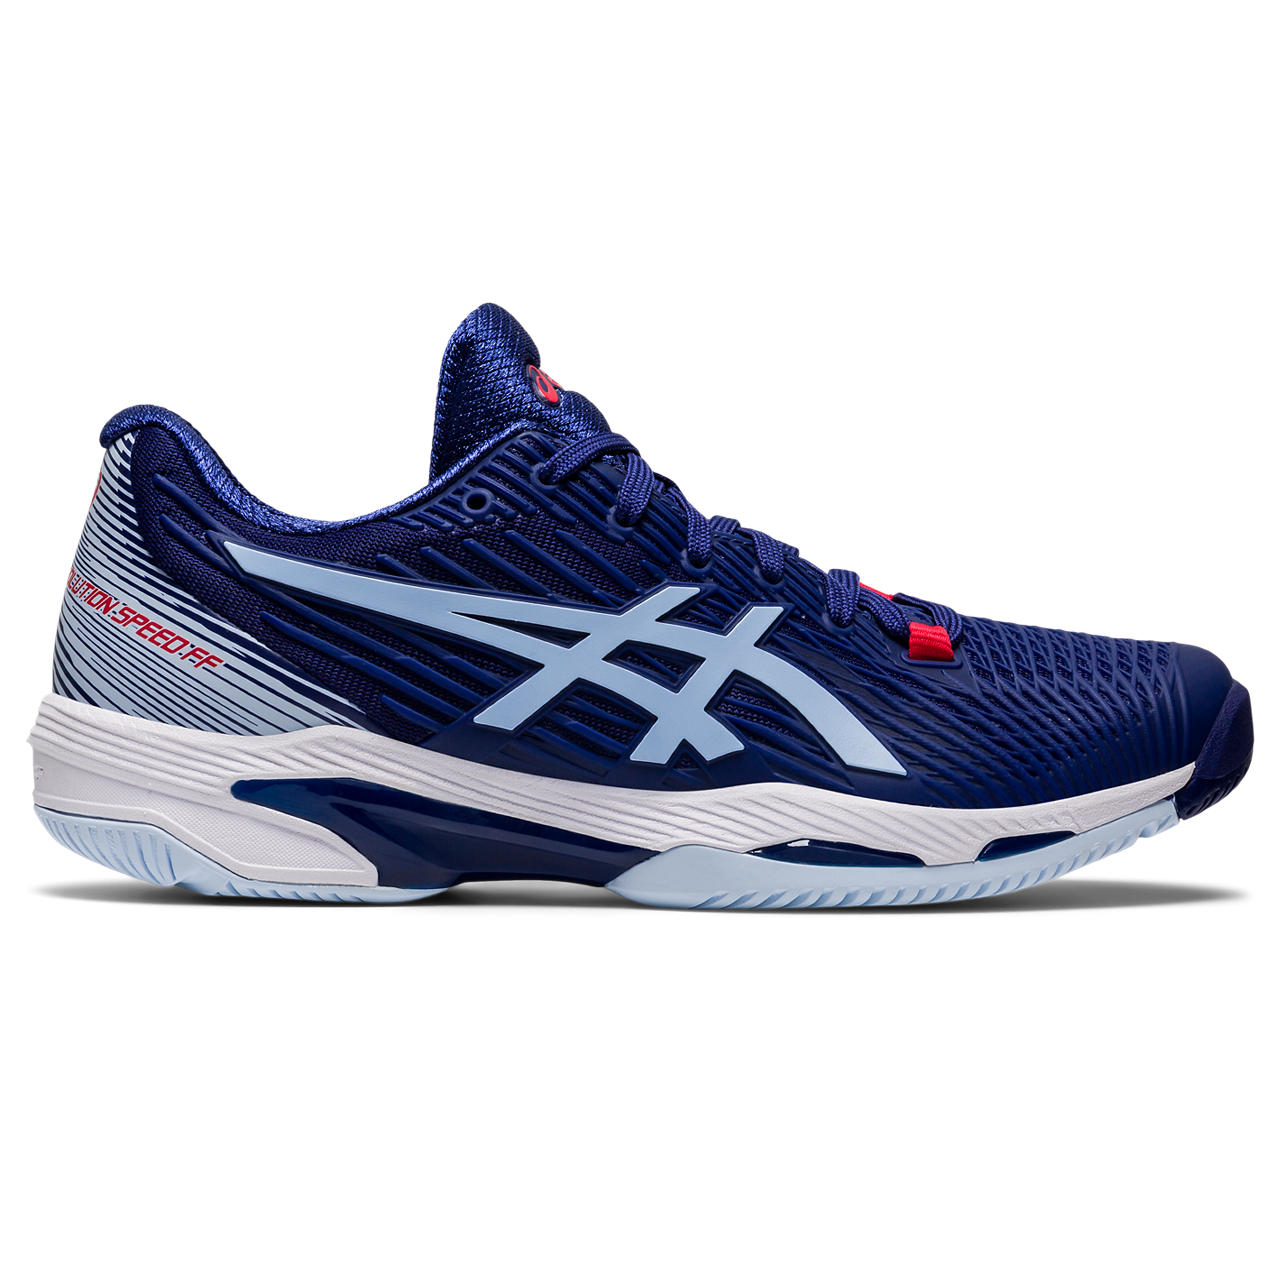 The fastest model in the ASICS tennis range, the Women's Solution Speed FF 2 is all about helping players expand their territory on the court. Combining better stability and a more flexible fit, this shoe is a recommended choice for athletes that are looking for quicker accelerations to be ahead of the ball.